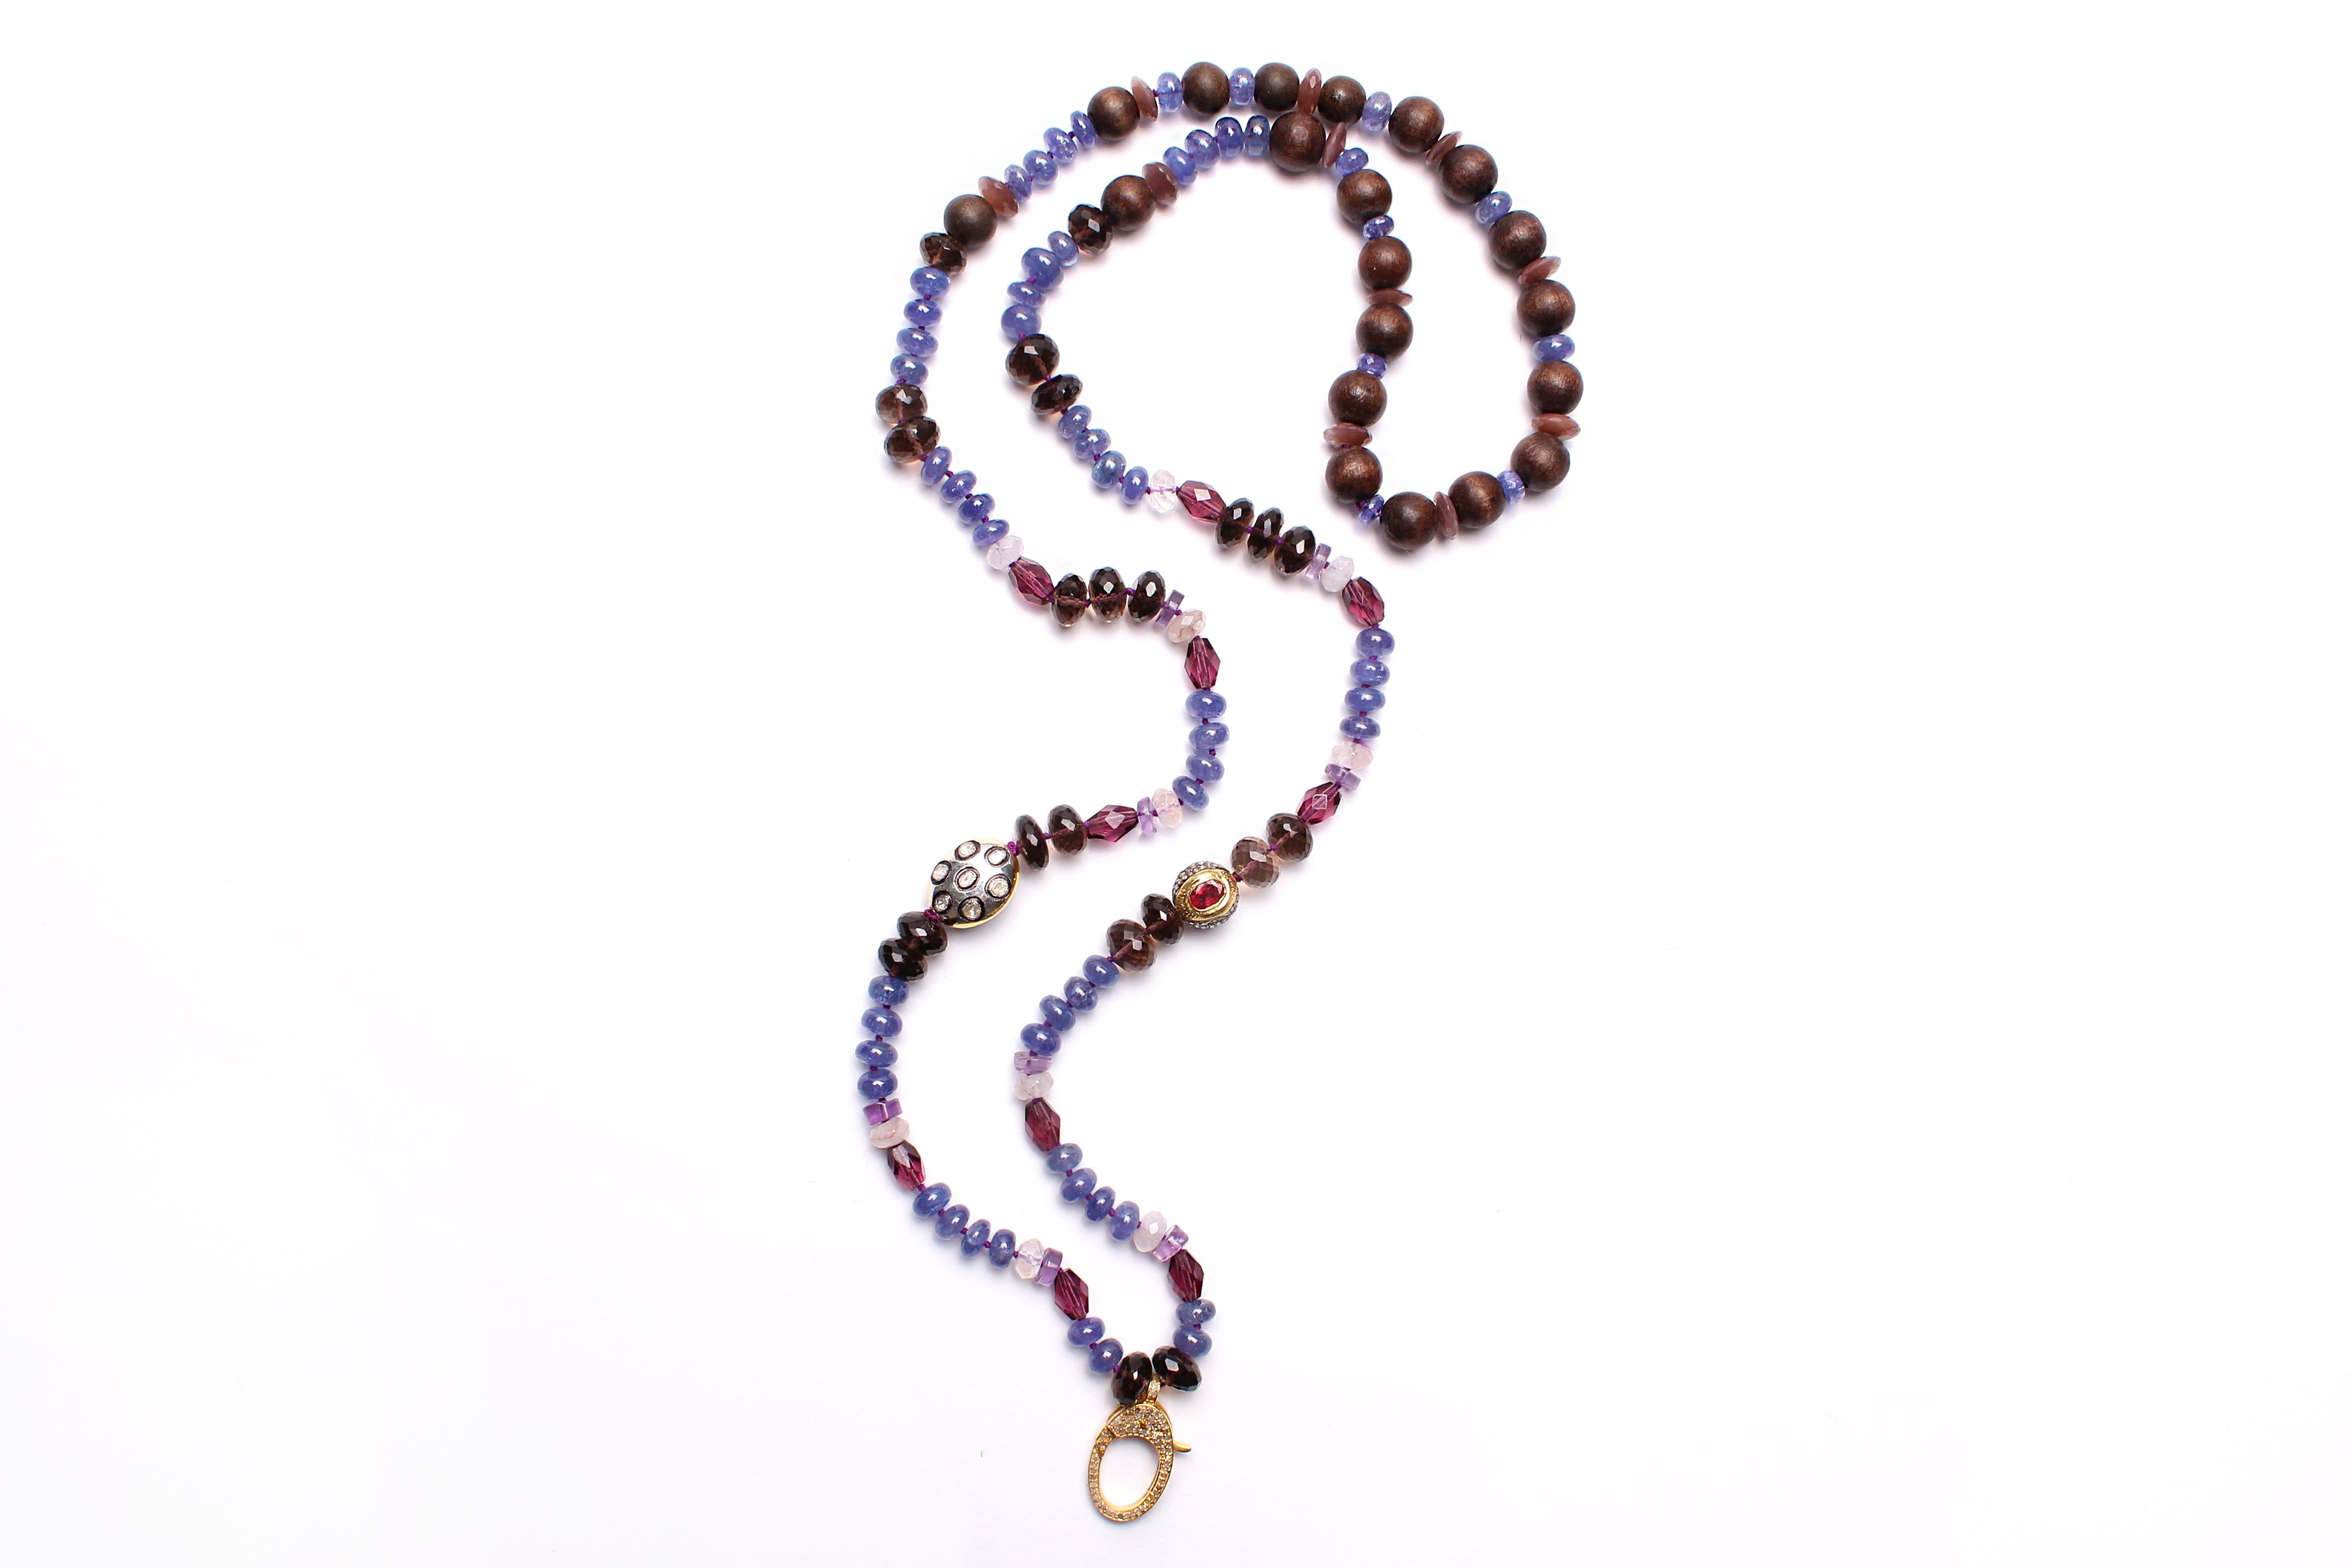 Women's or Men's CLARISSA BRONFMAN Tazanite Diamond Sapphire Ruby Wood Feather Beaded Necklace  For Sale